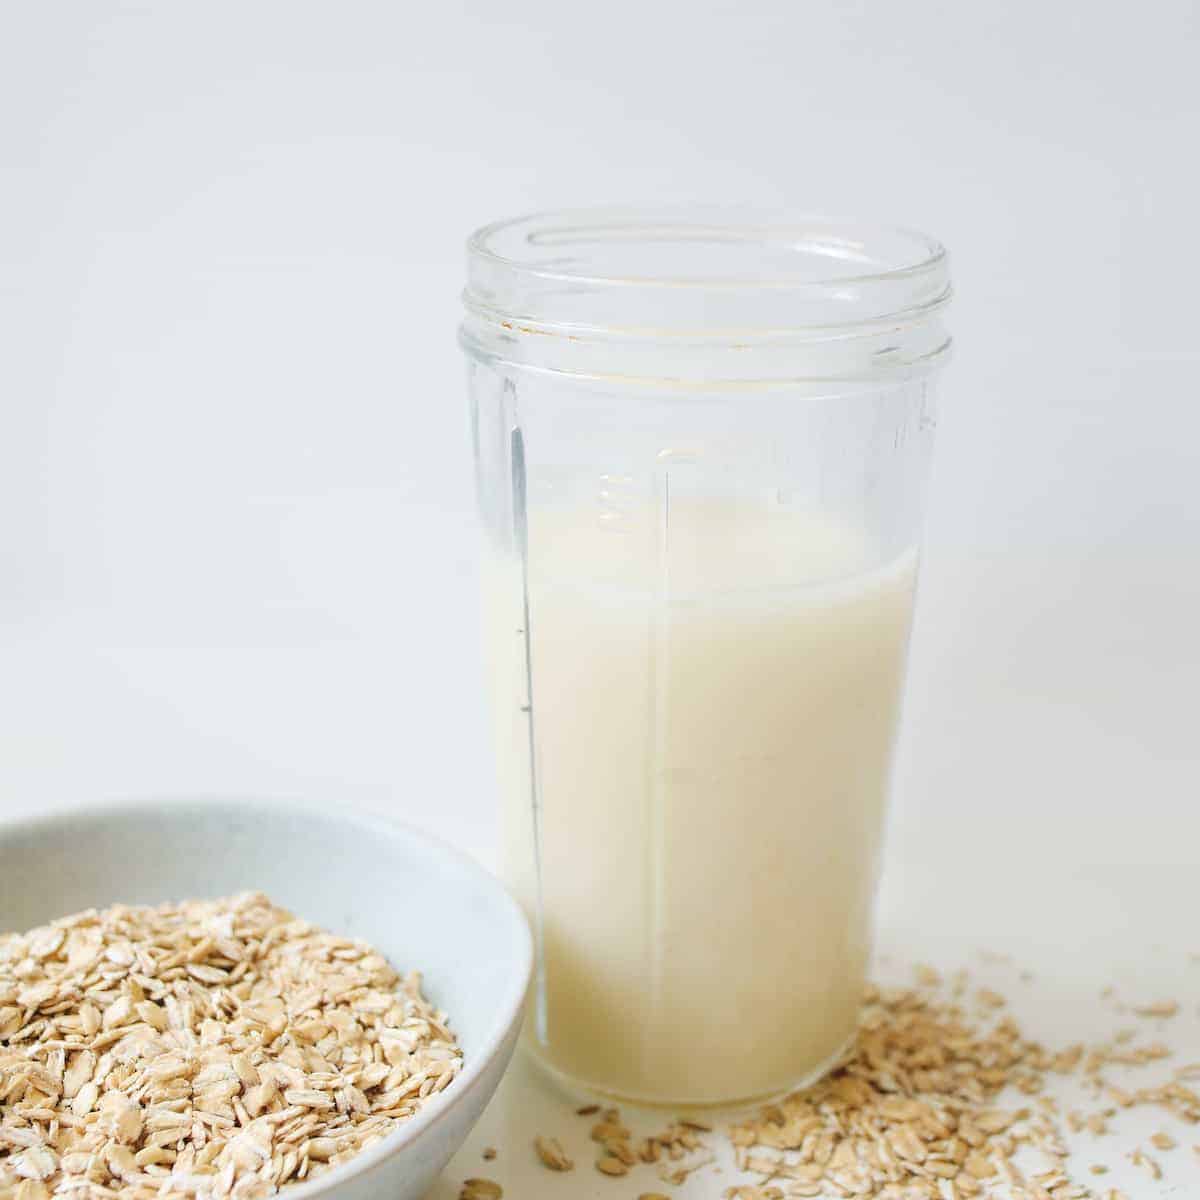 Oats in a white bowl and a glass of milk